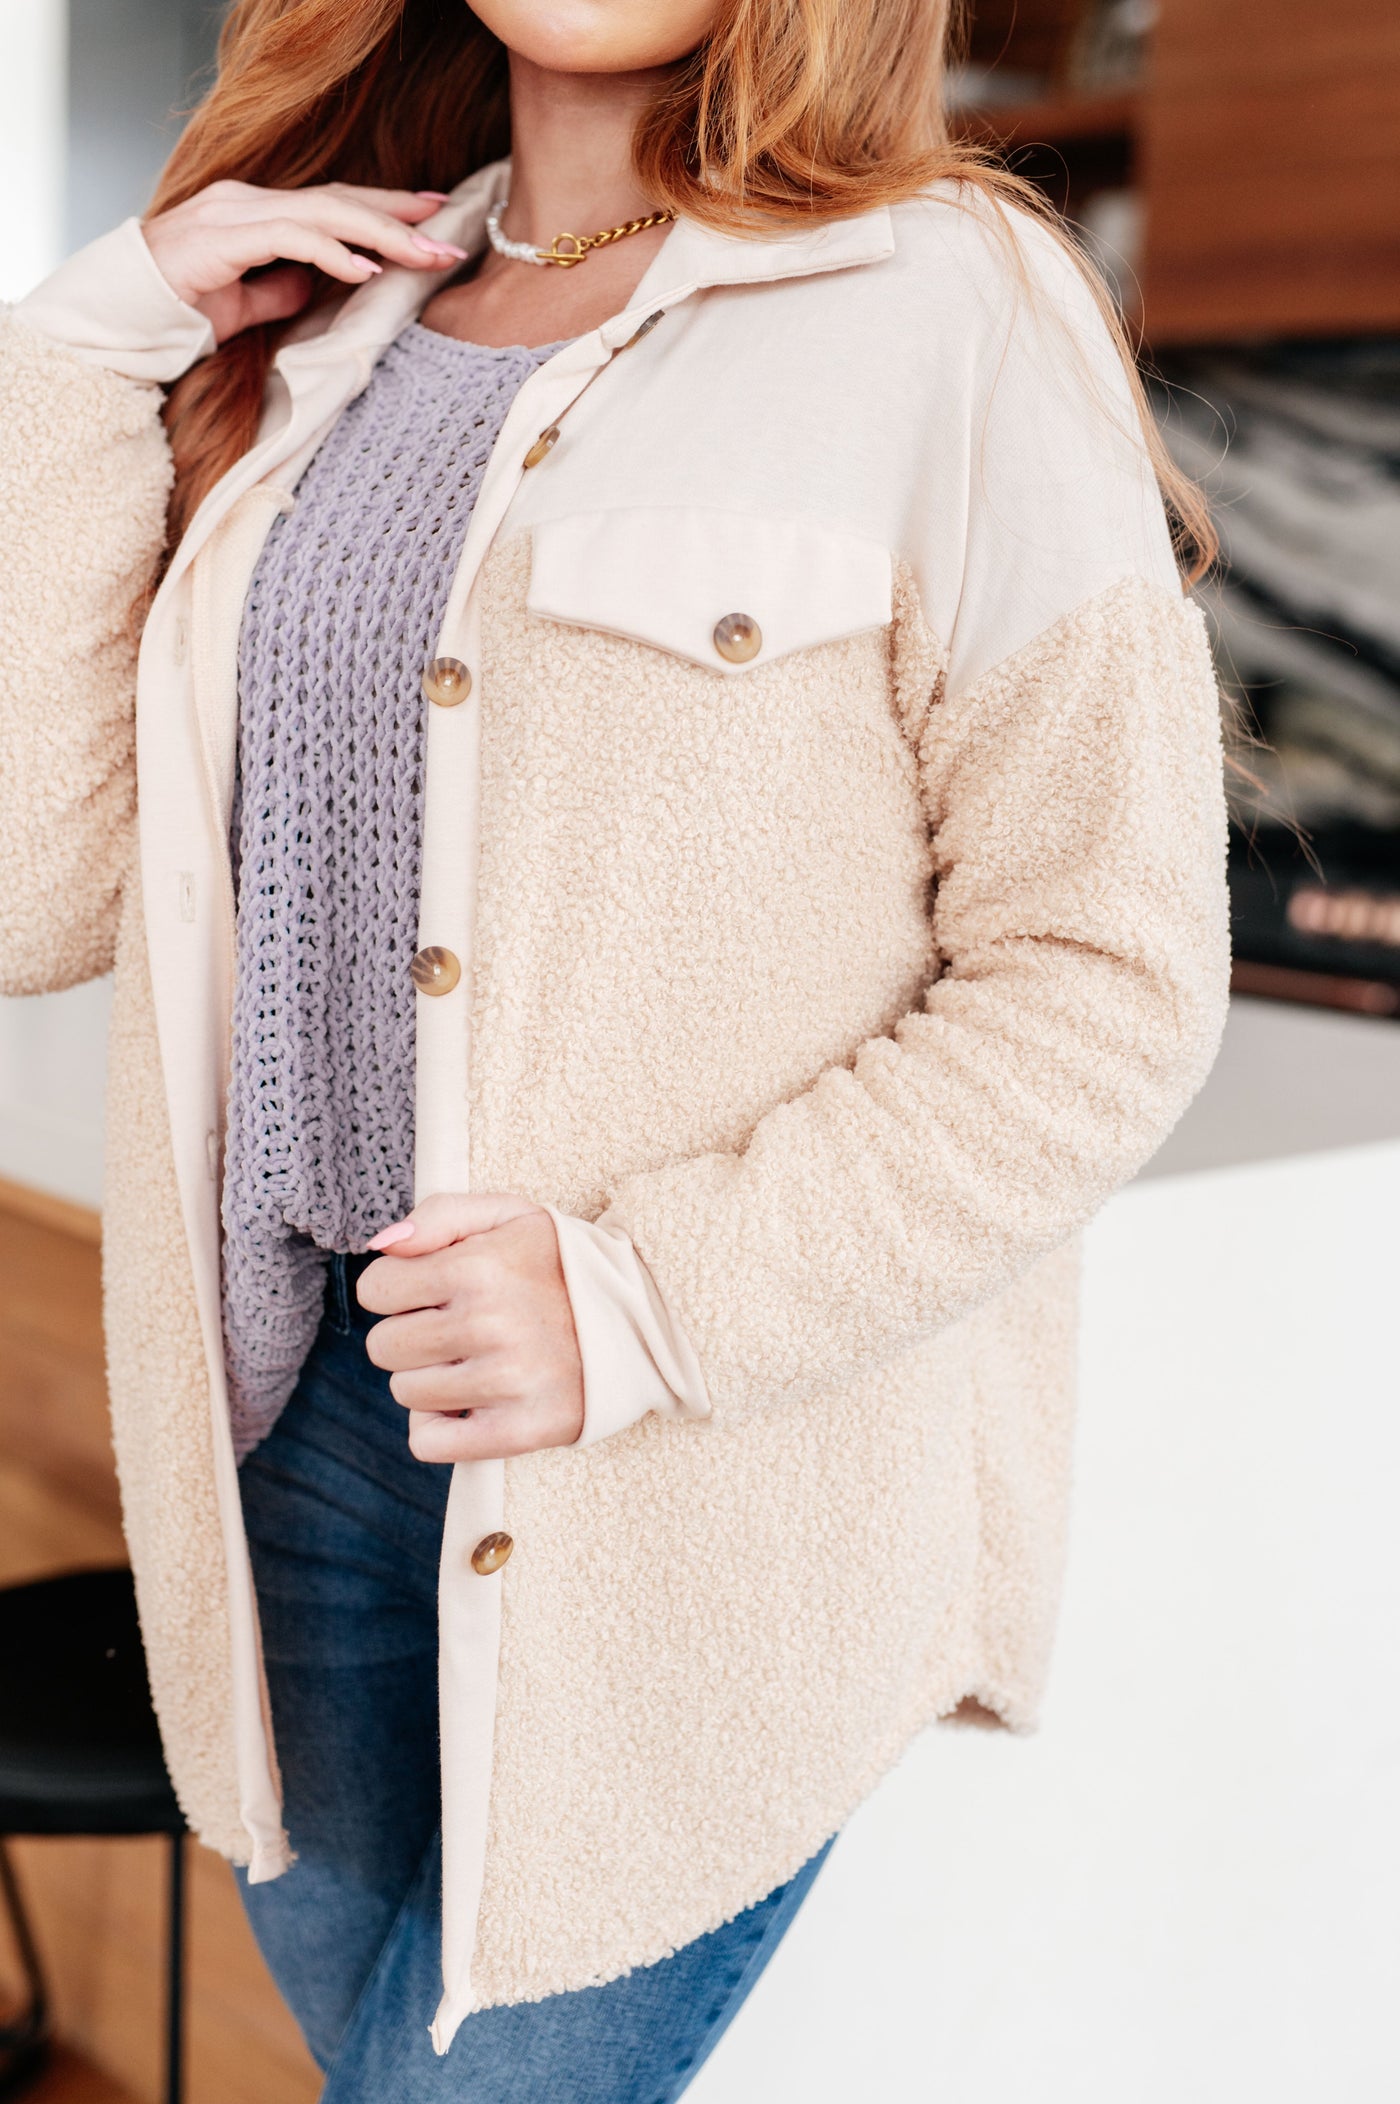 Made from cozy sherpa fleece and jersey knit, this shacket features a collared neckline and adorable faux pockets